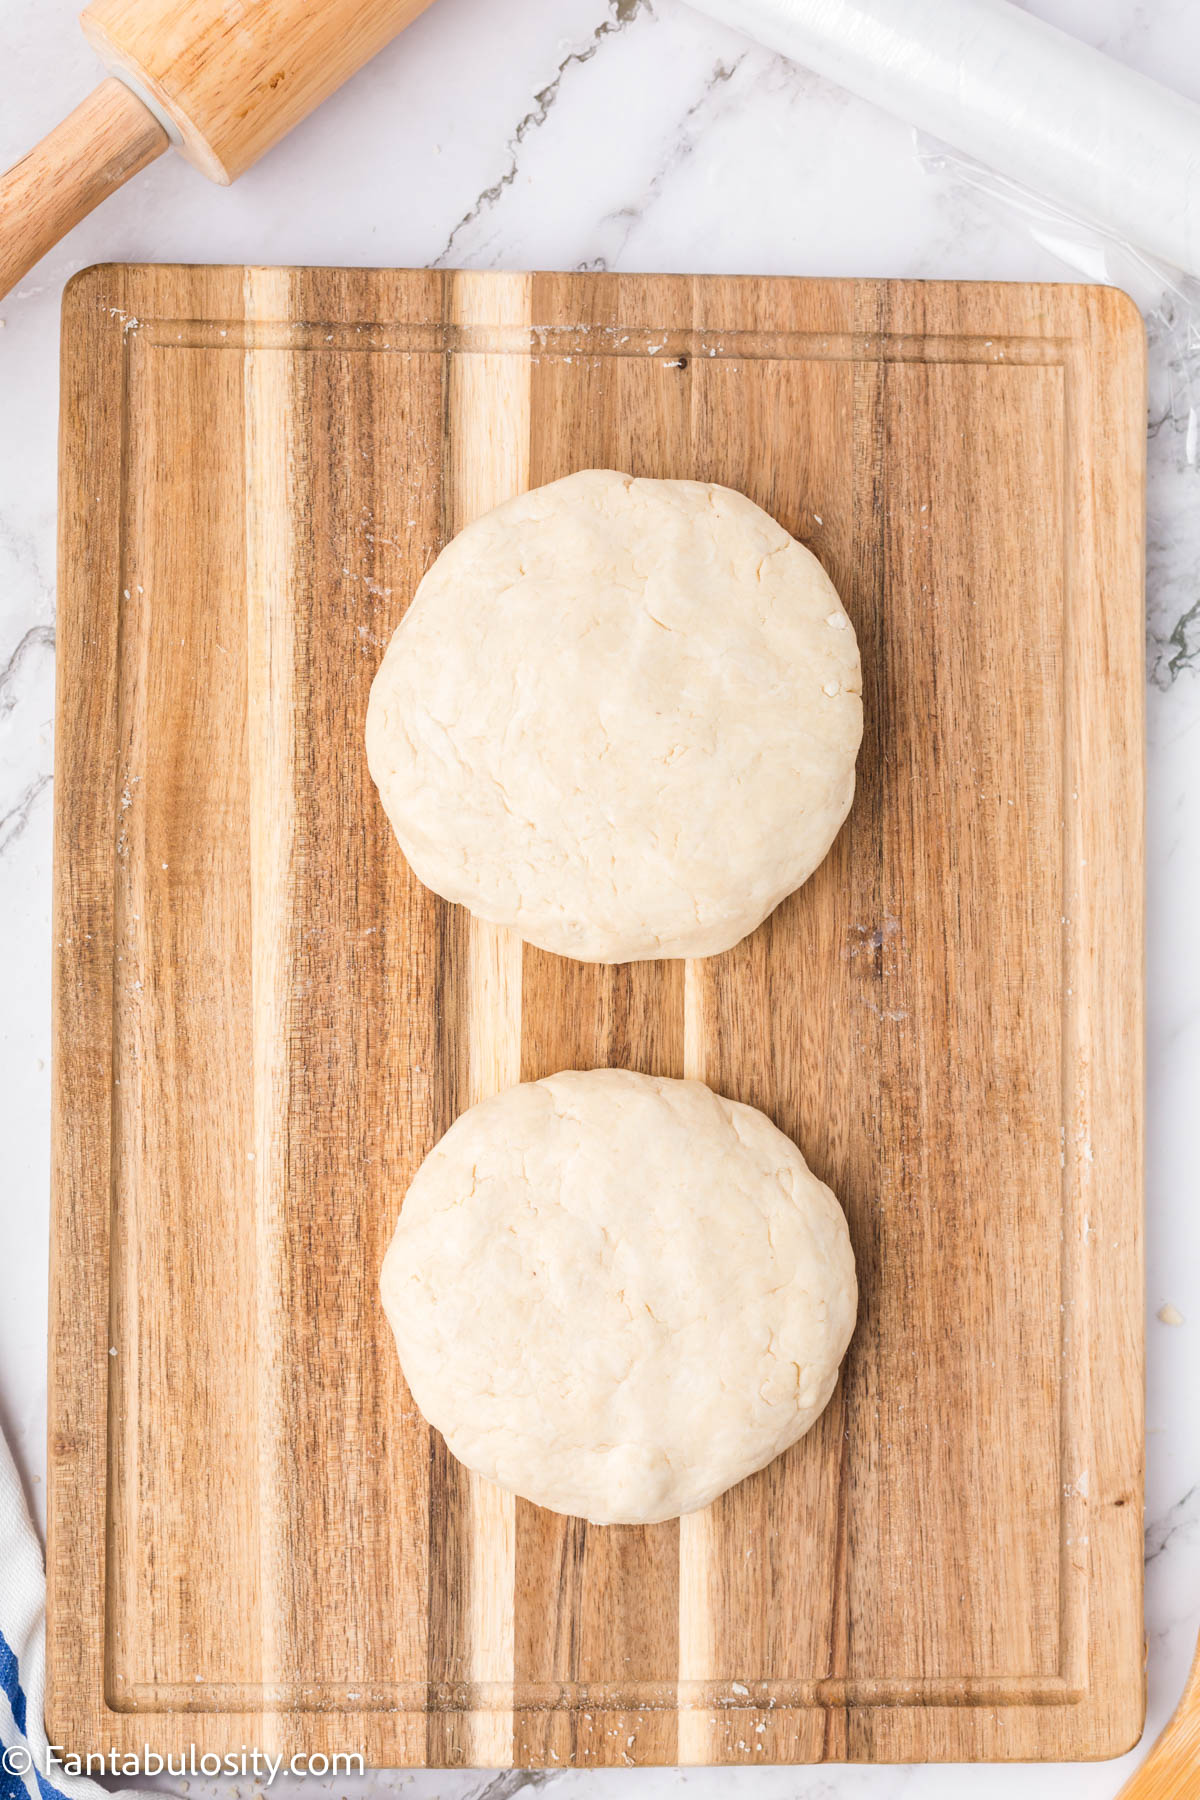 Two discs of dough on a wood cutting board. 